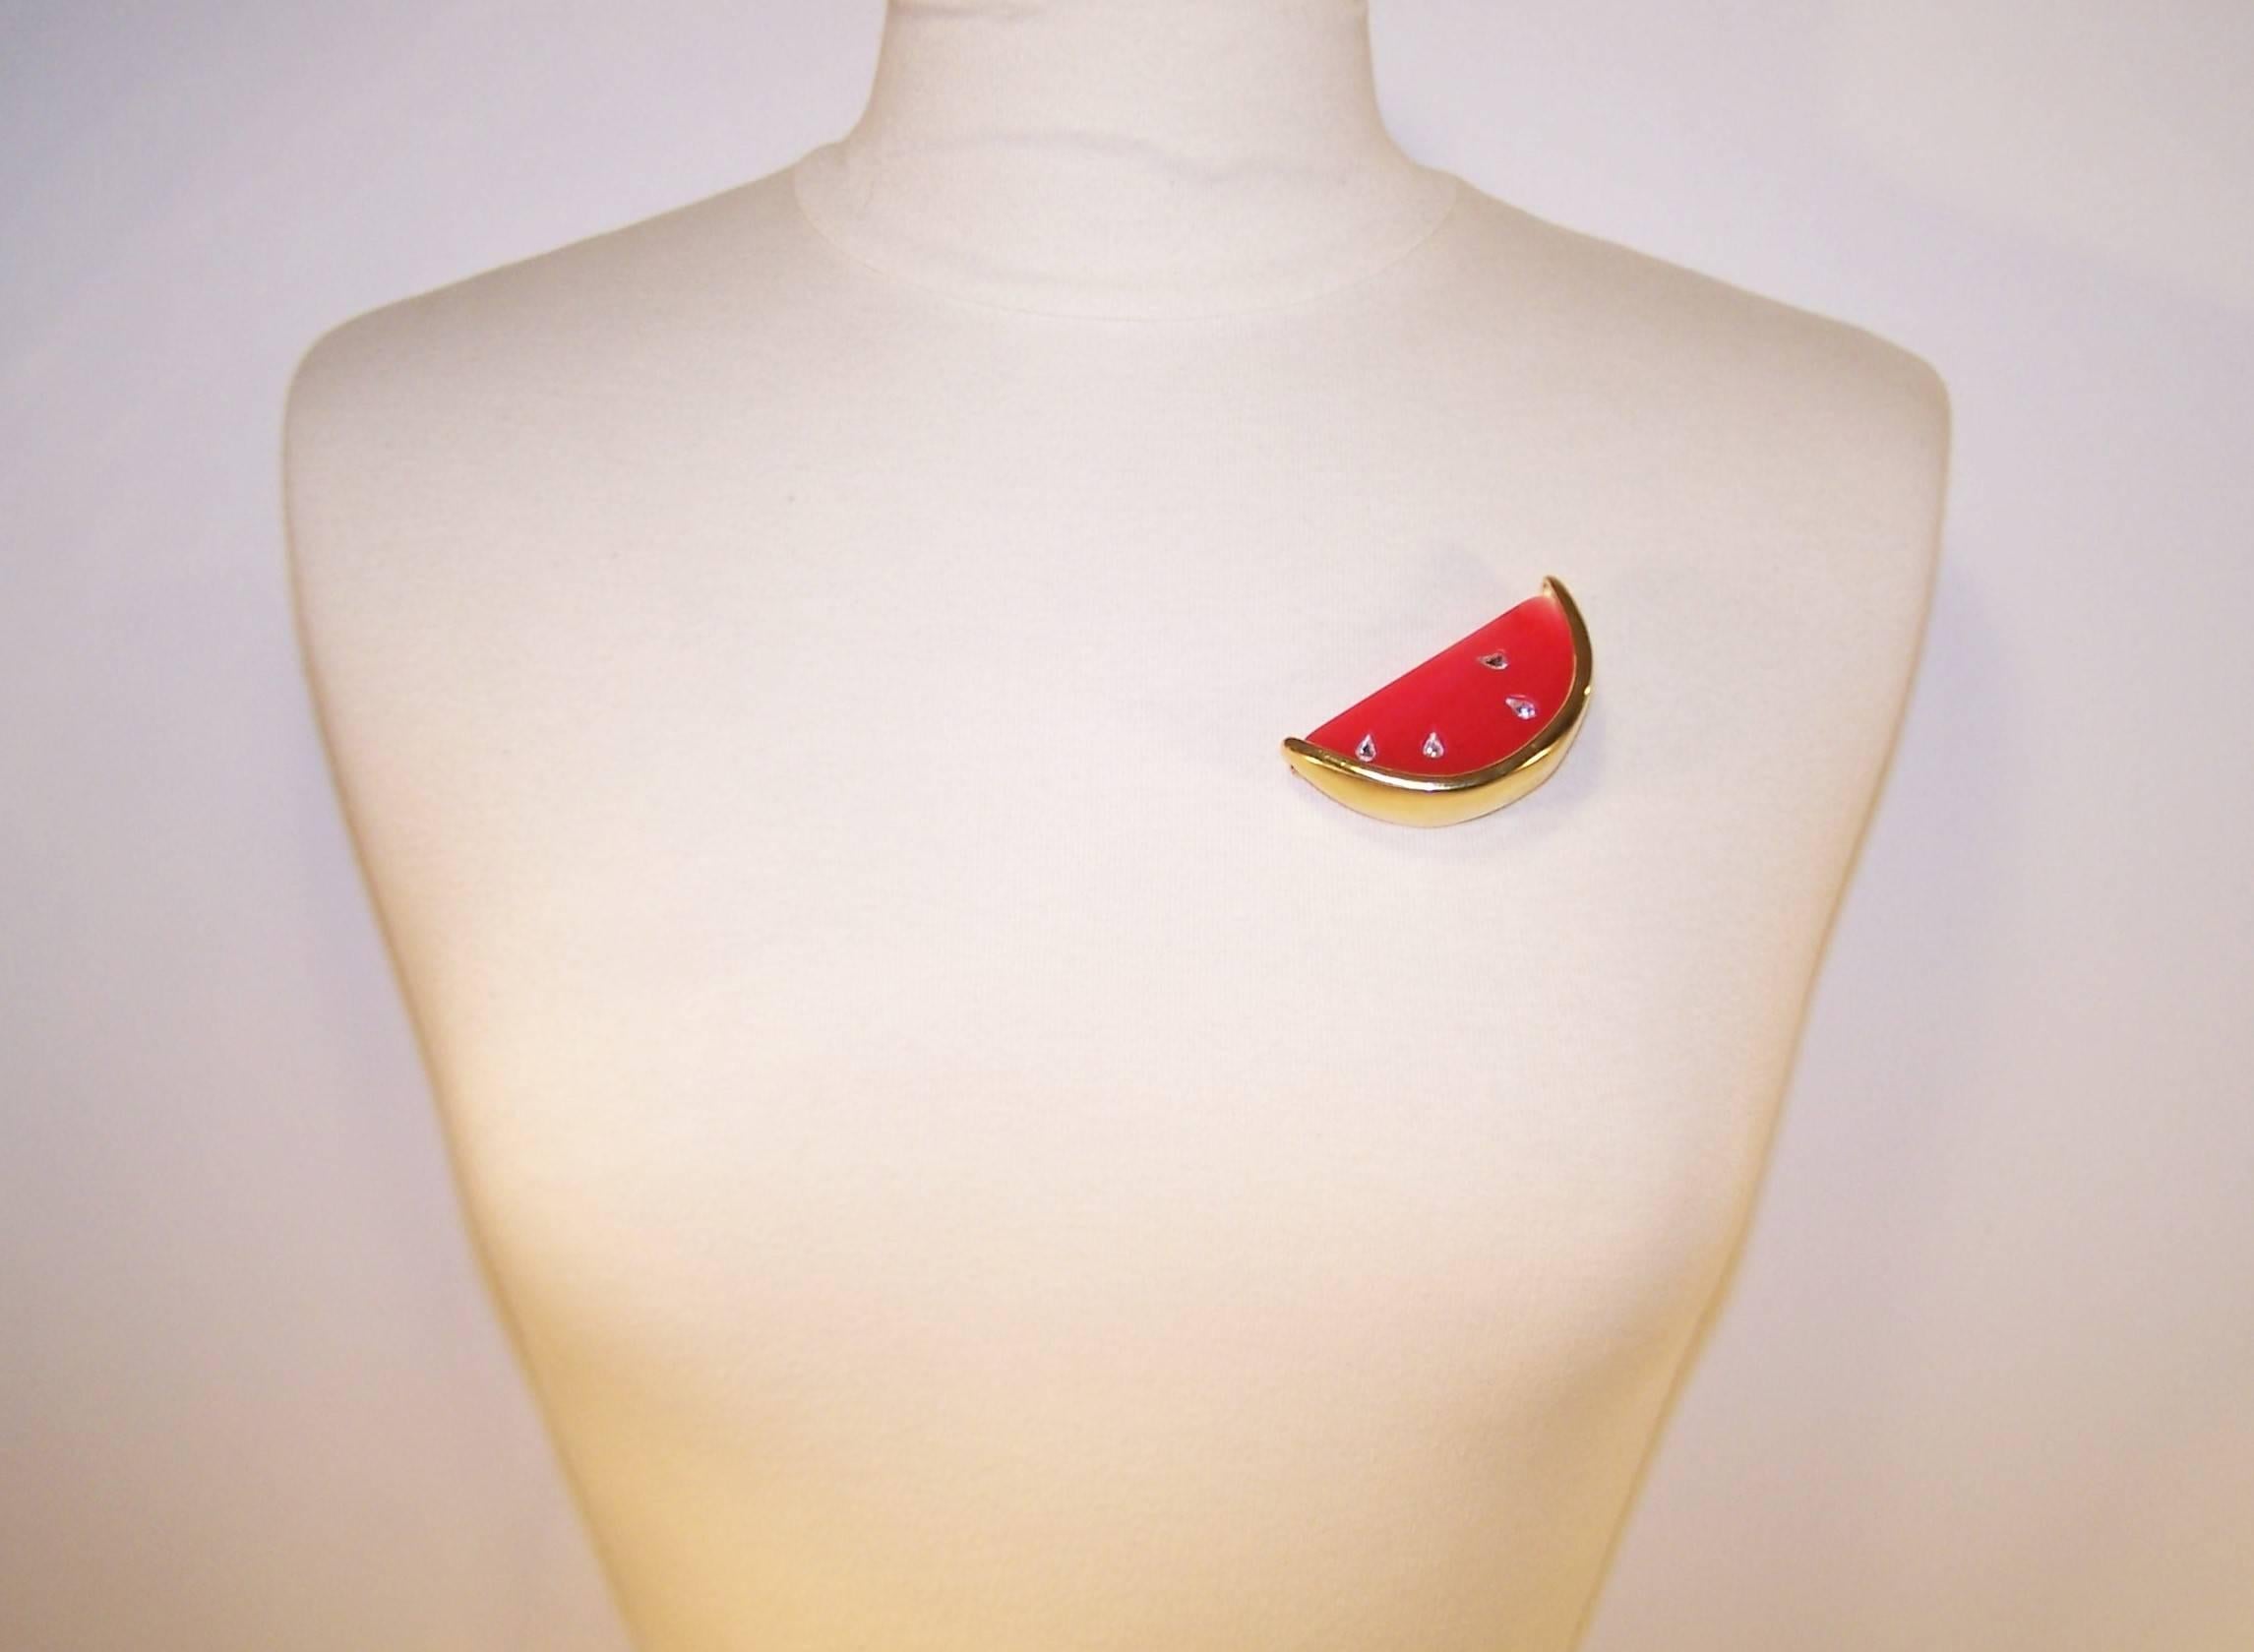 Much like his lovely clothing designs, Hubert de Givenchy created elegant and feminine costume jewelry starting in the 1950's and continuing throughout his career.  This watermelon brooch is made from red resin with teardrop shaped crystal